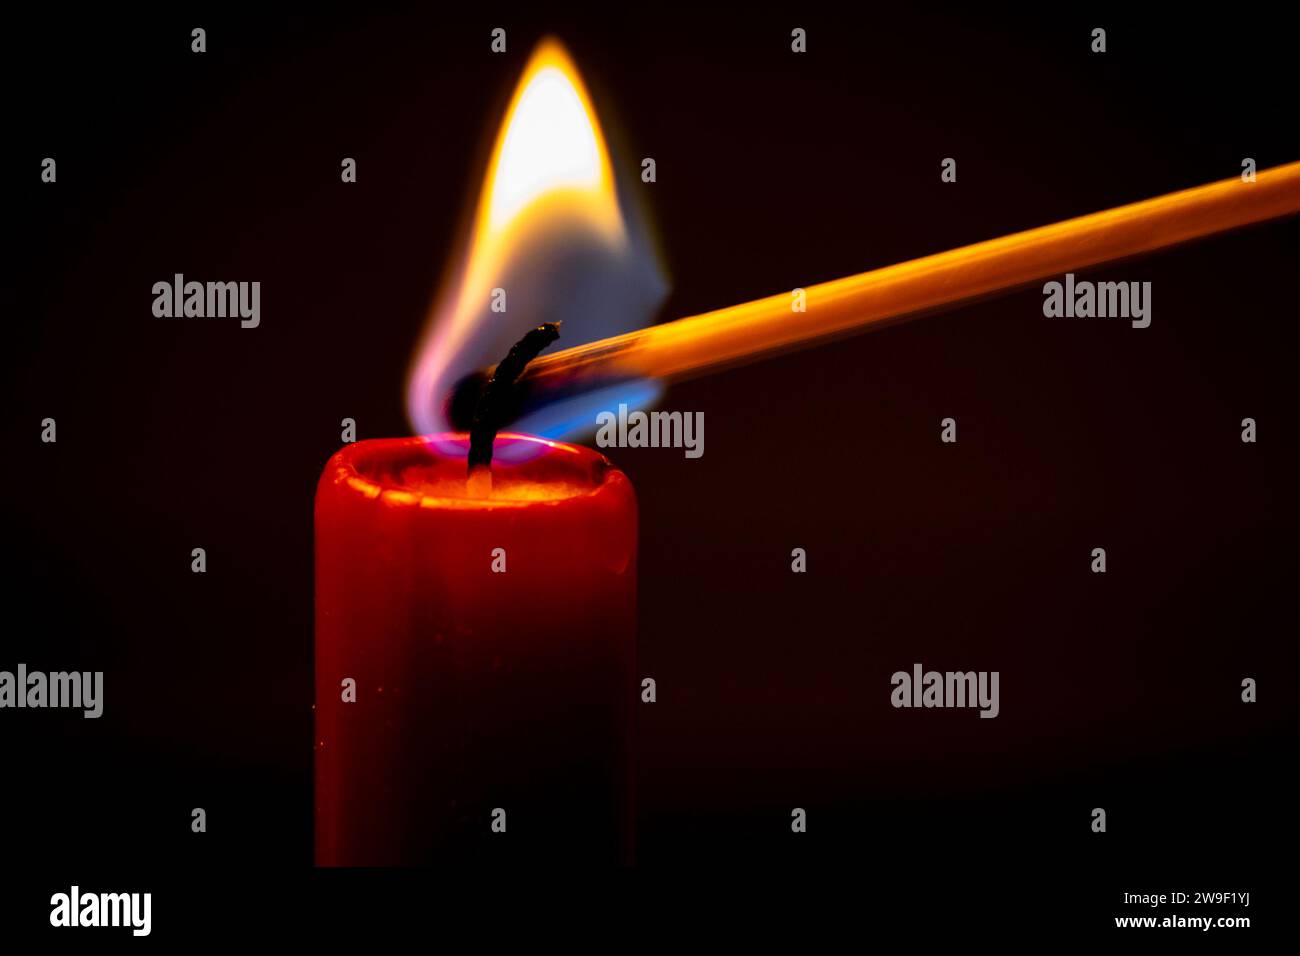 A red candle is lighted by a match. Stock Photo